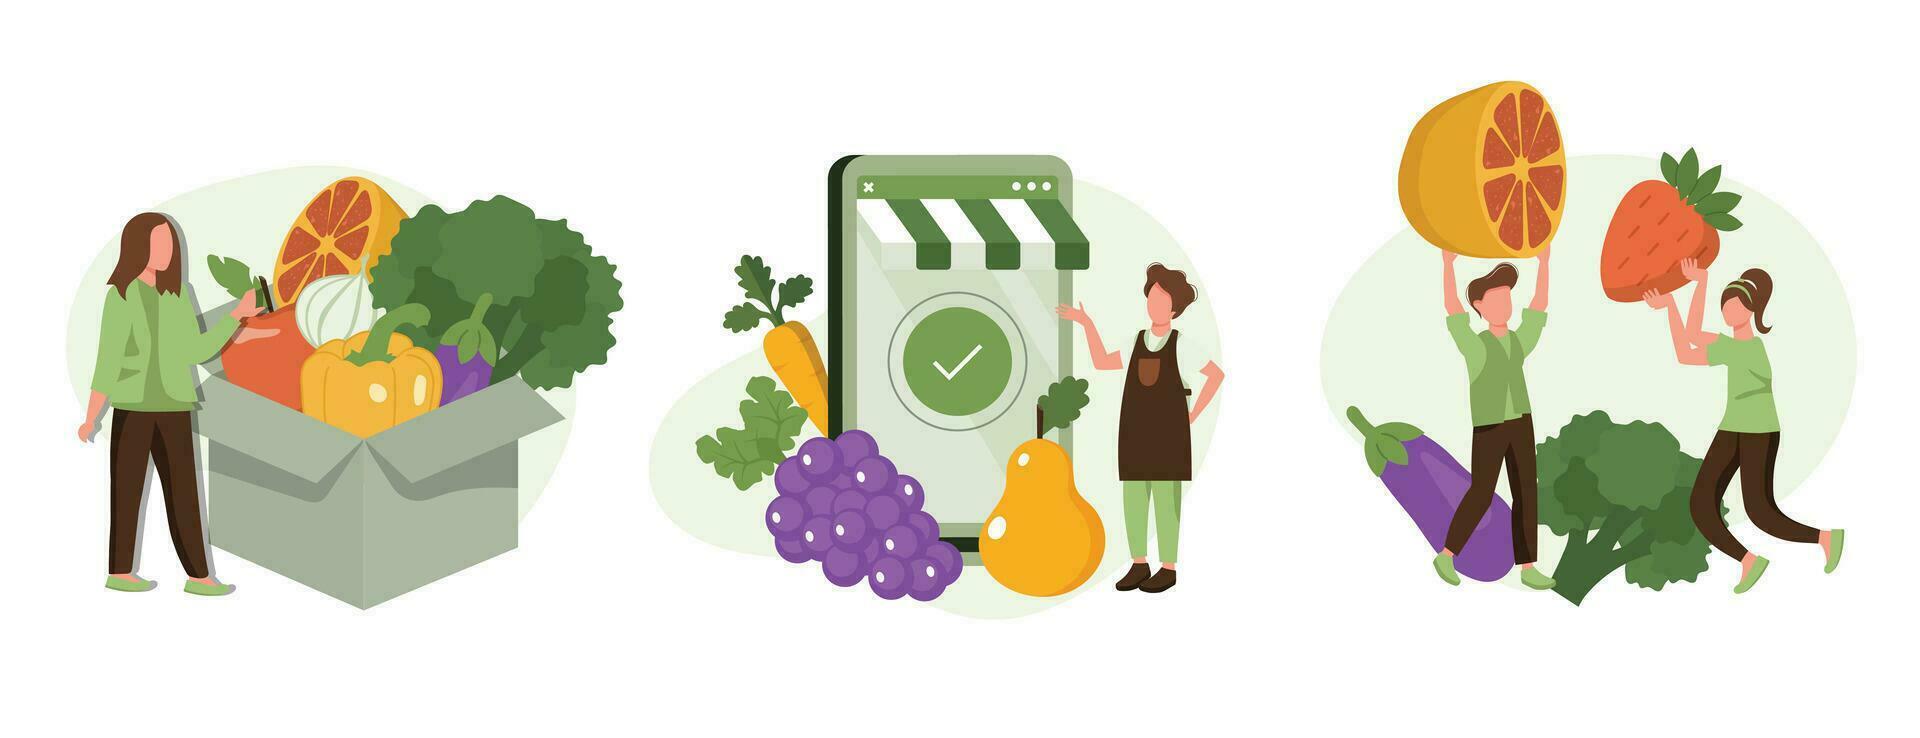 Healthy eating illustration set. Character buying fresh organic fruit, vegetables in online grocery shop and receiving veggie box delivery. Local production support concept. Vector illustration.